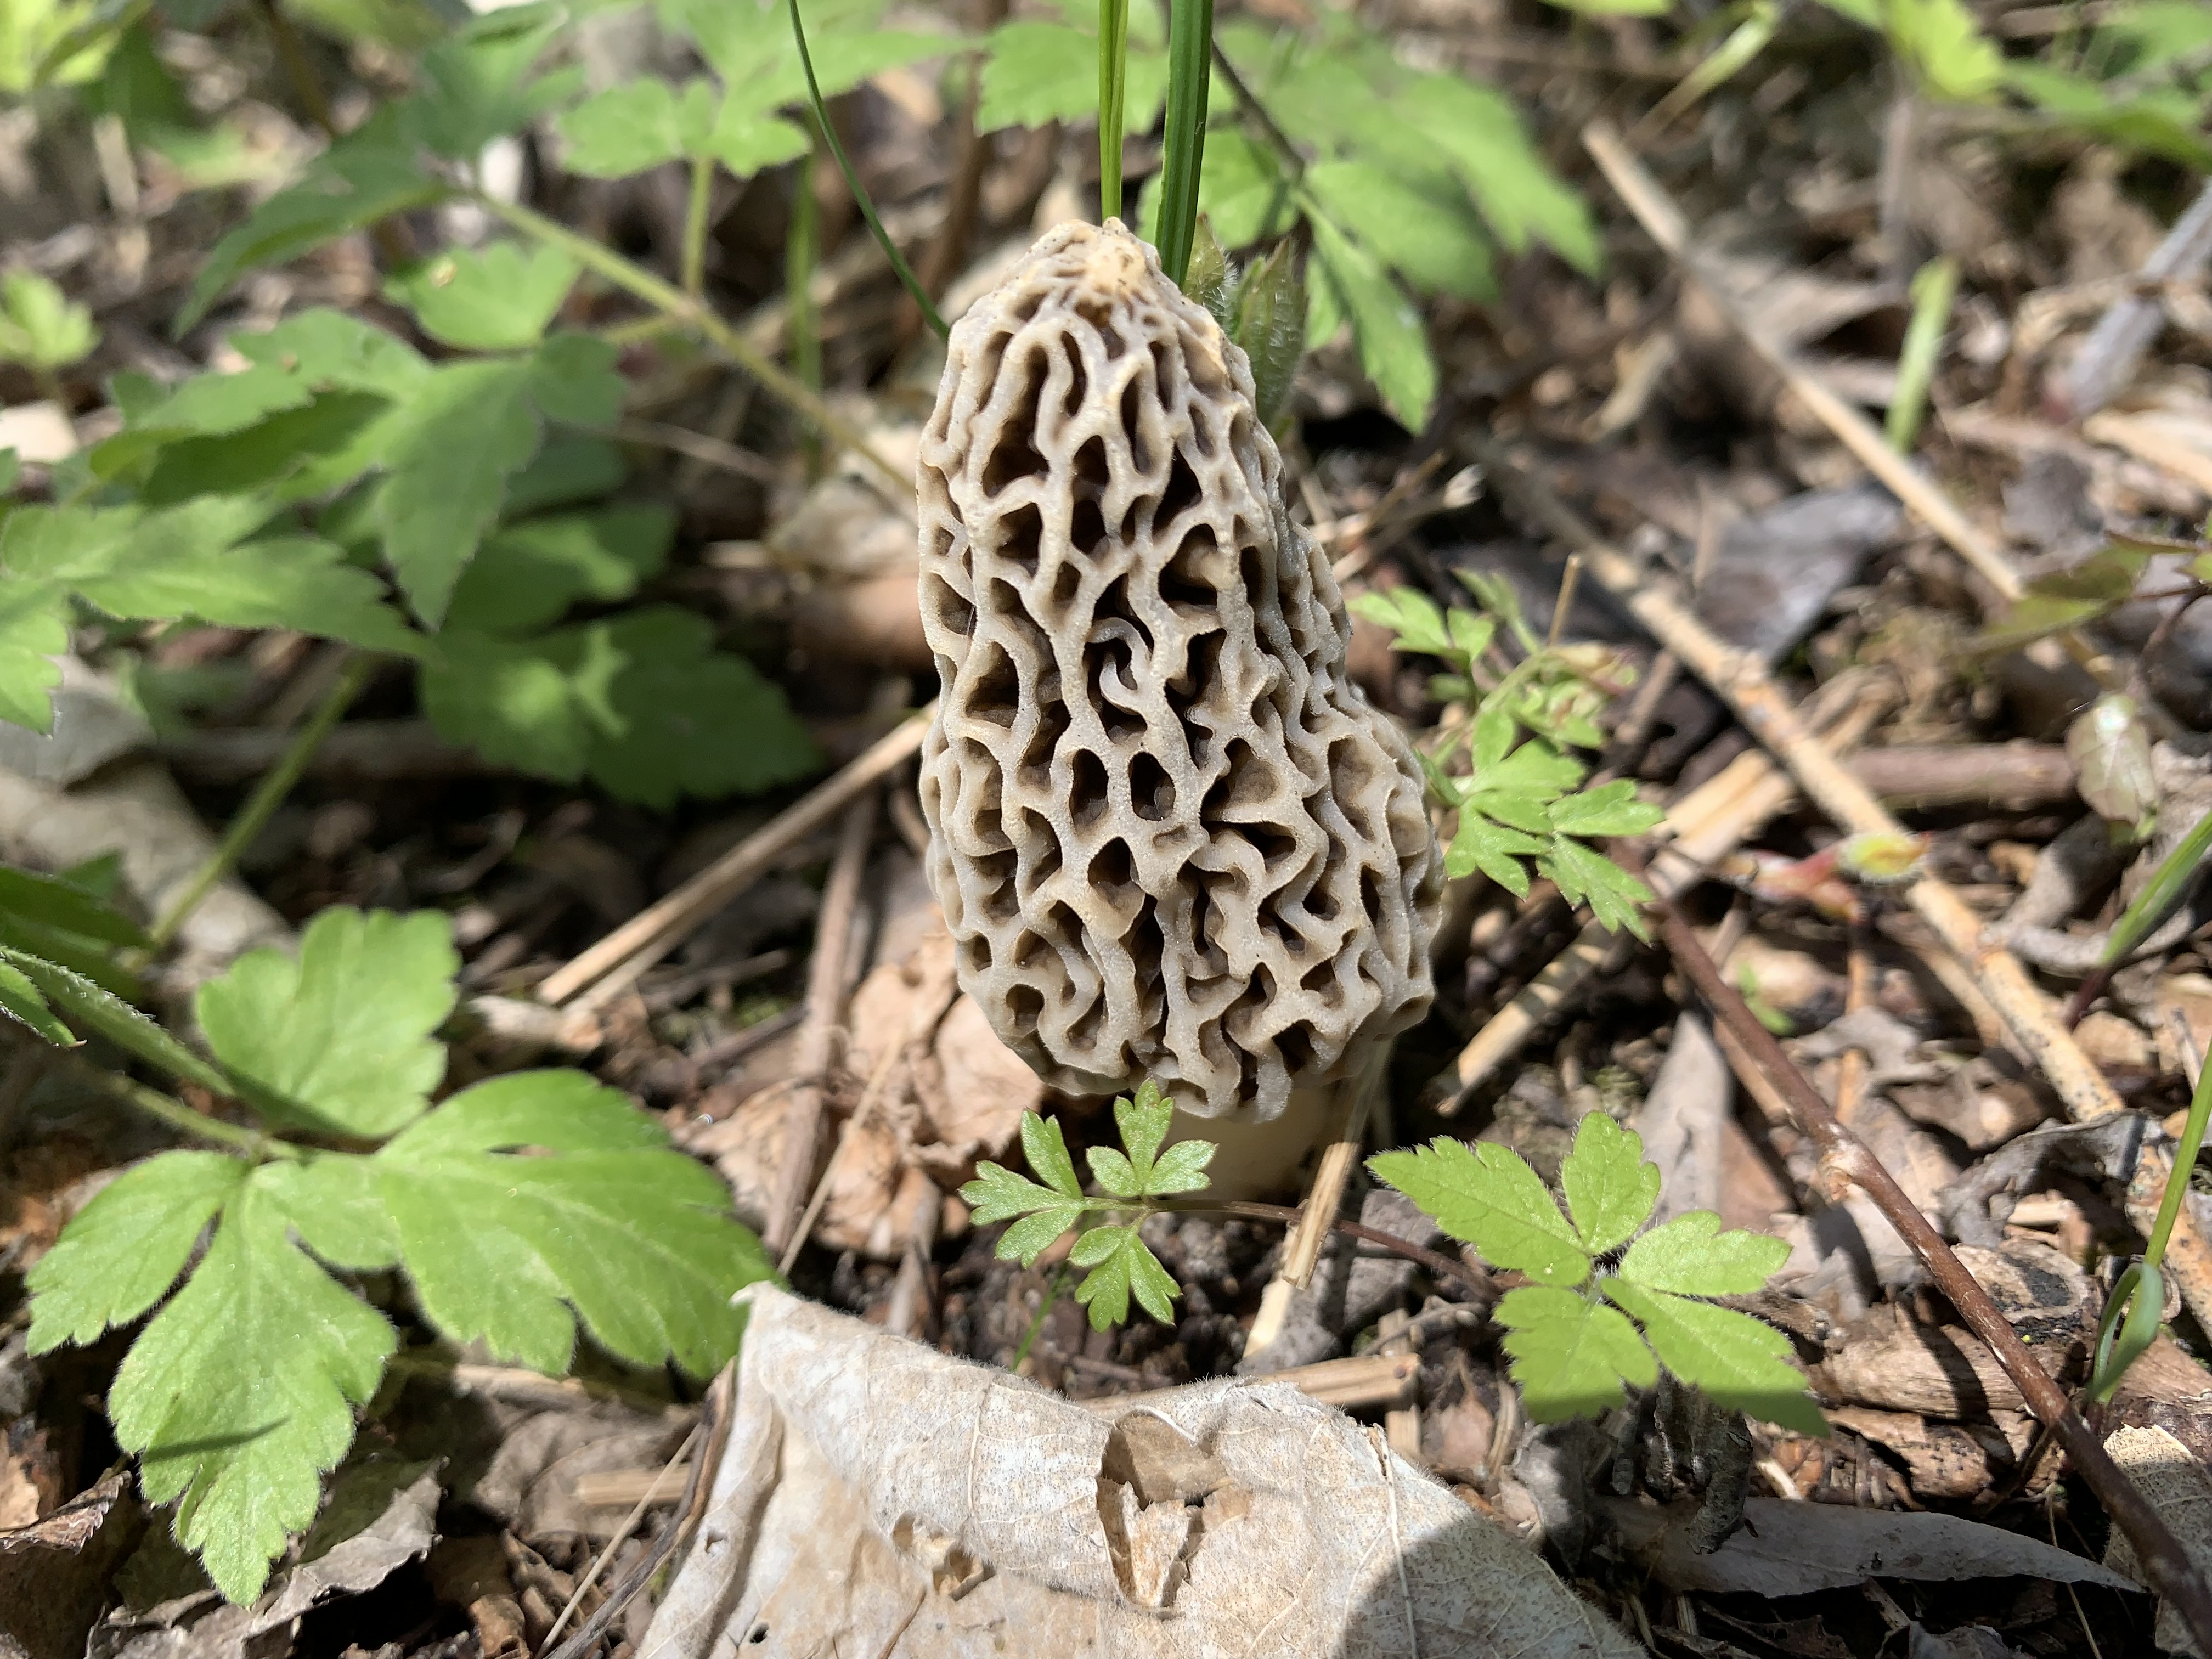 Fleshy, cone-shape fruiting body of a morel mushroom stands atop a short, hollow stem, amid green foliage on a forest floor. Reproductive spores are produced and dispersed from the hollows and folds of the flesh.